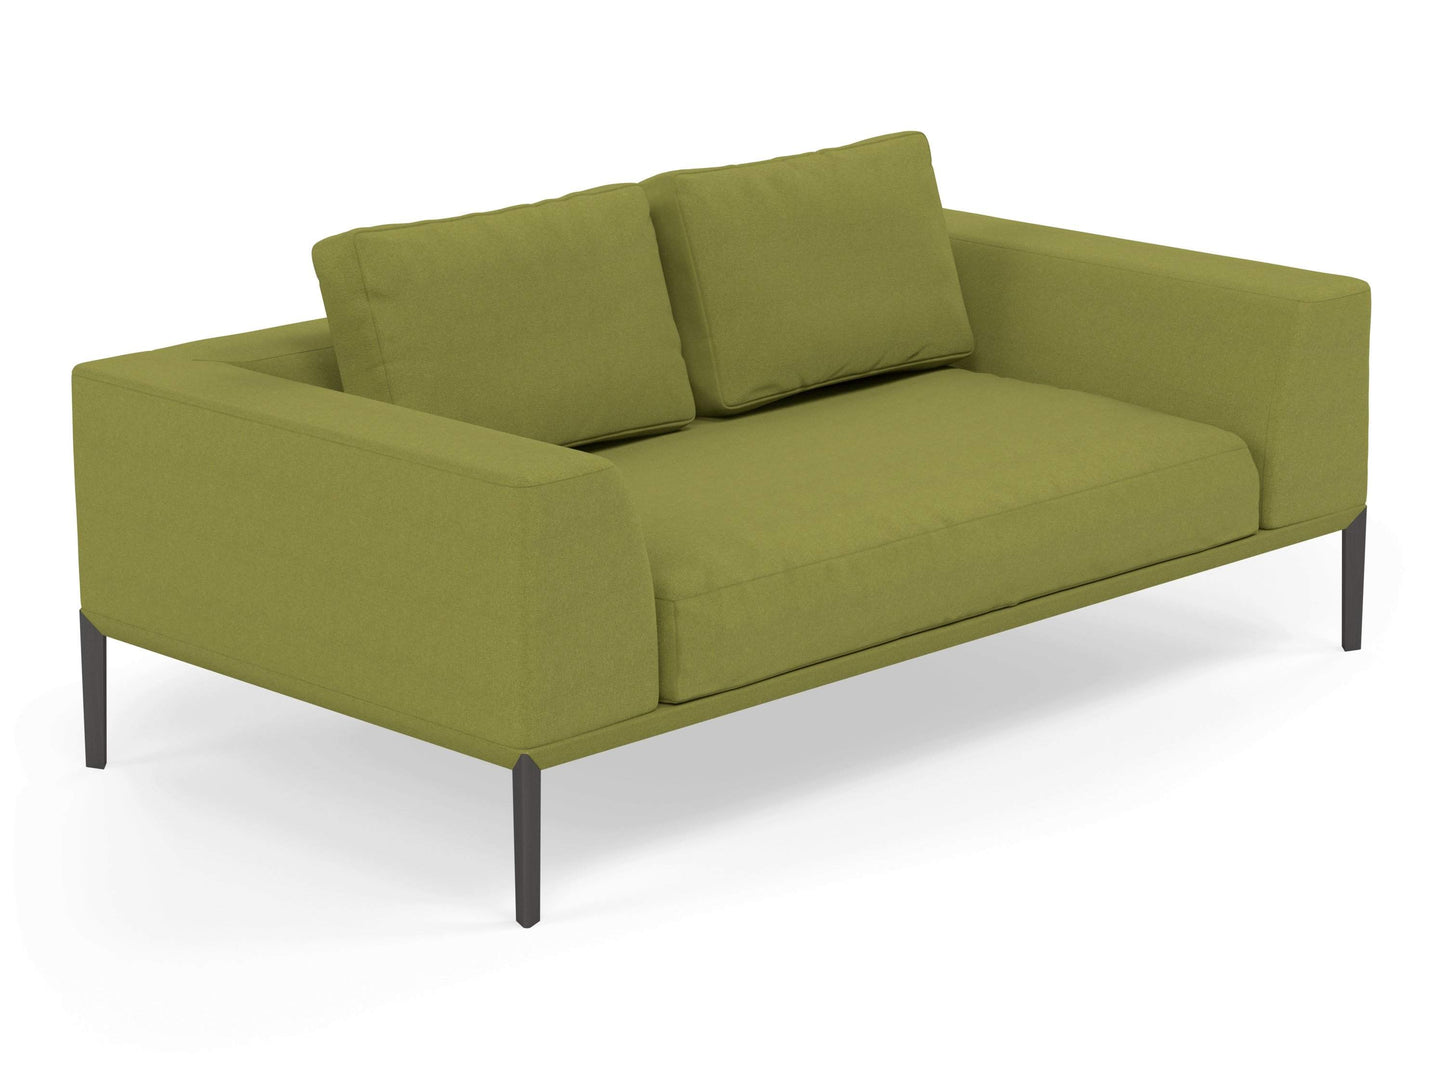 Modern 2 Seater Sofa with 2 Armrests in Lime Green Fabric-Distinct Designs (London) Ltd